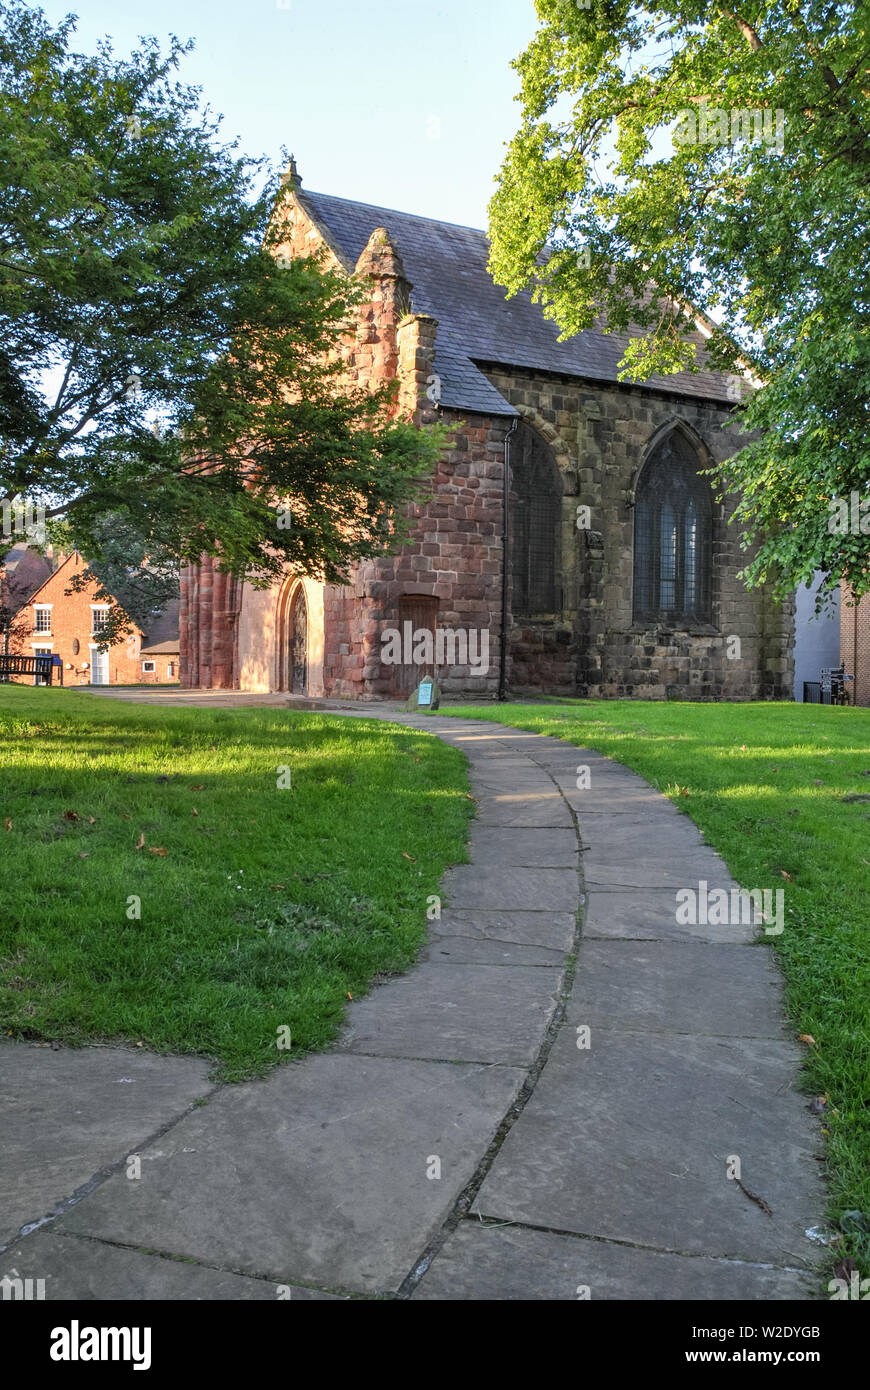 The site of Old St Chads Church in Shrewsbury, Shropshire Stock Photo